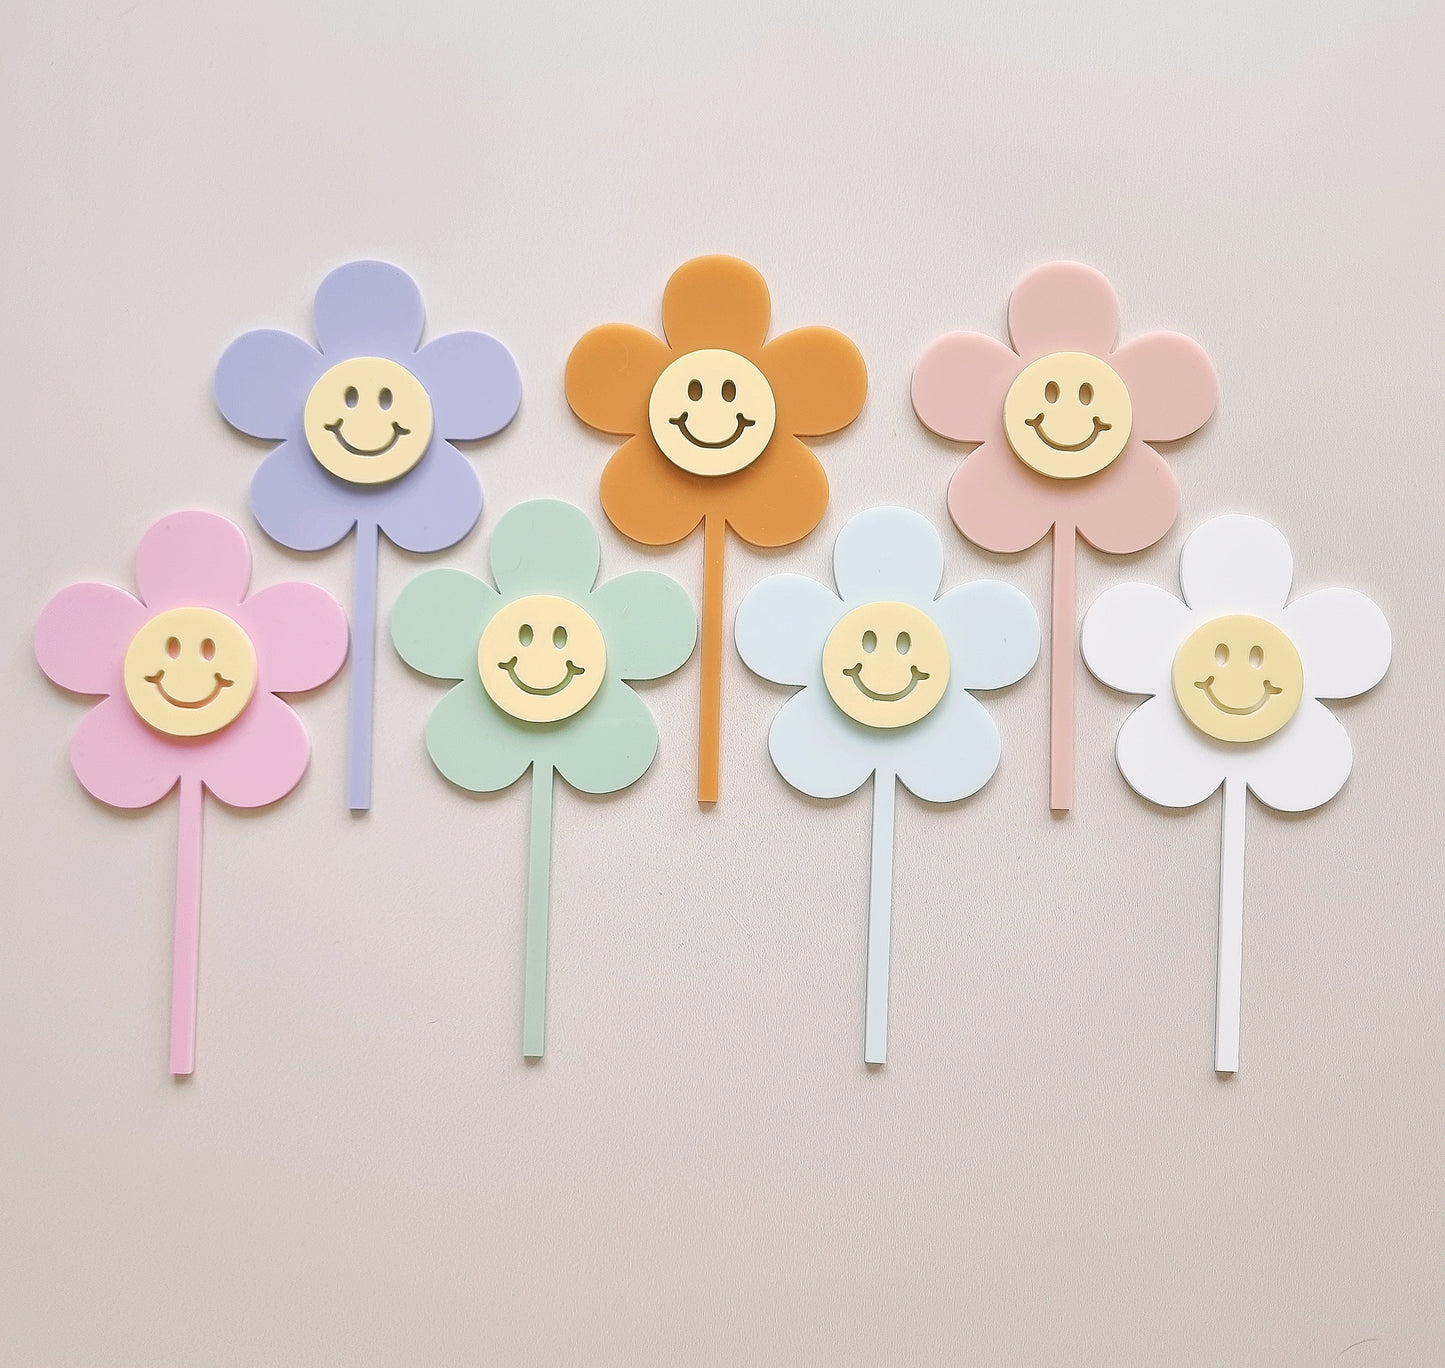 Acrylic 'Have A Nice Daisy' Cake Toppers/Plant Stakes